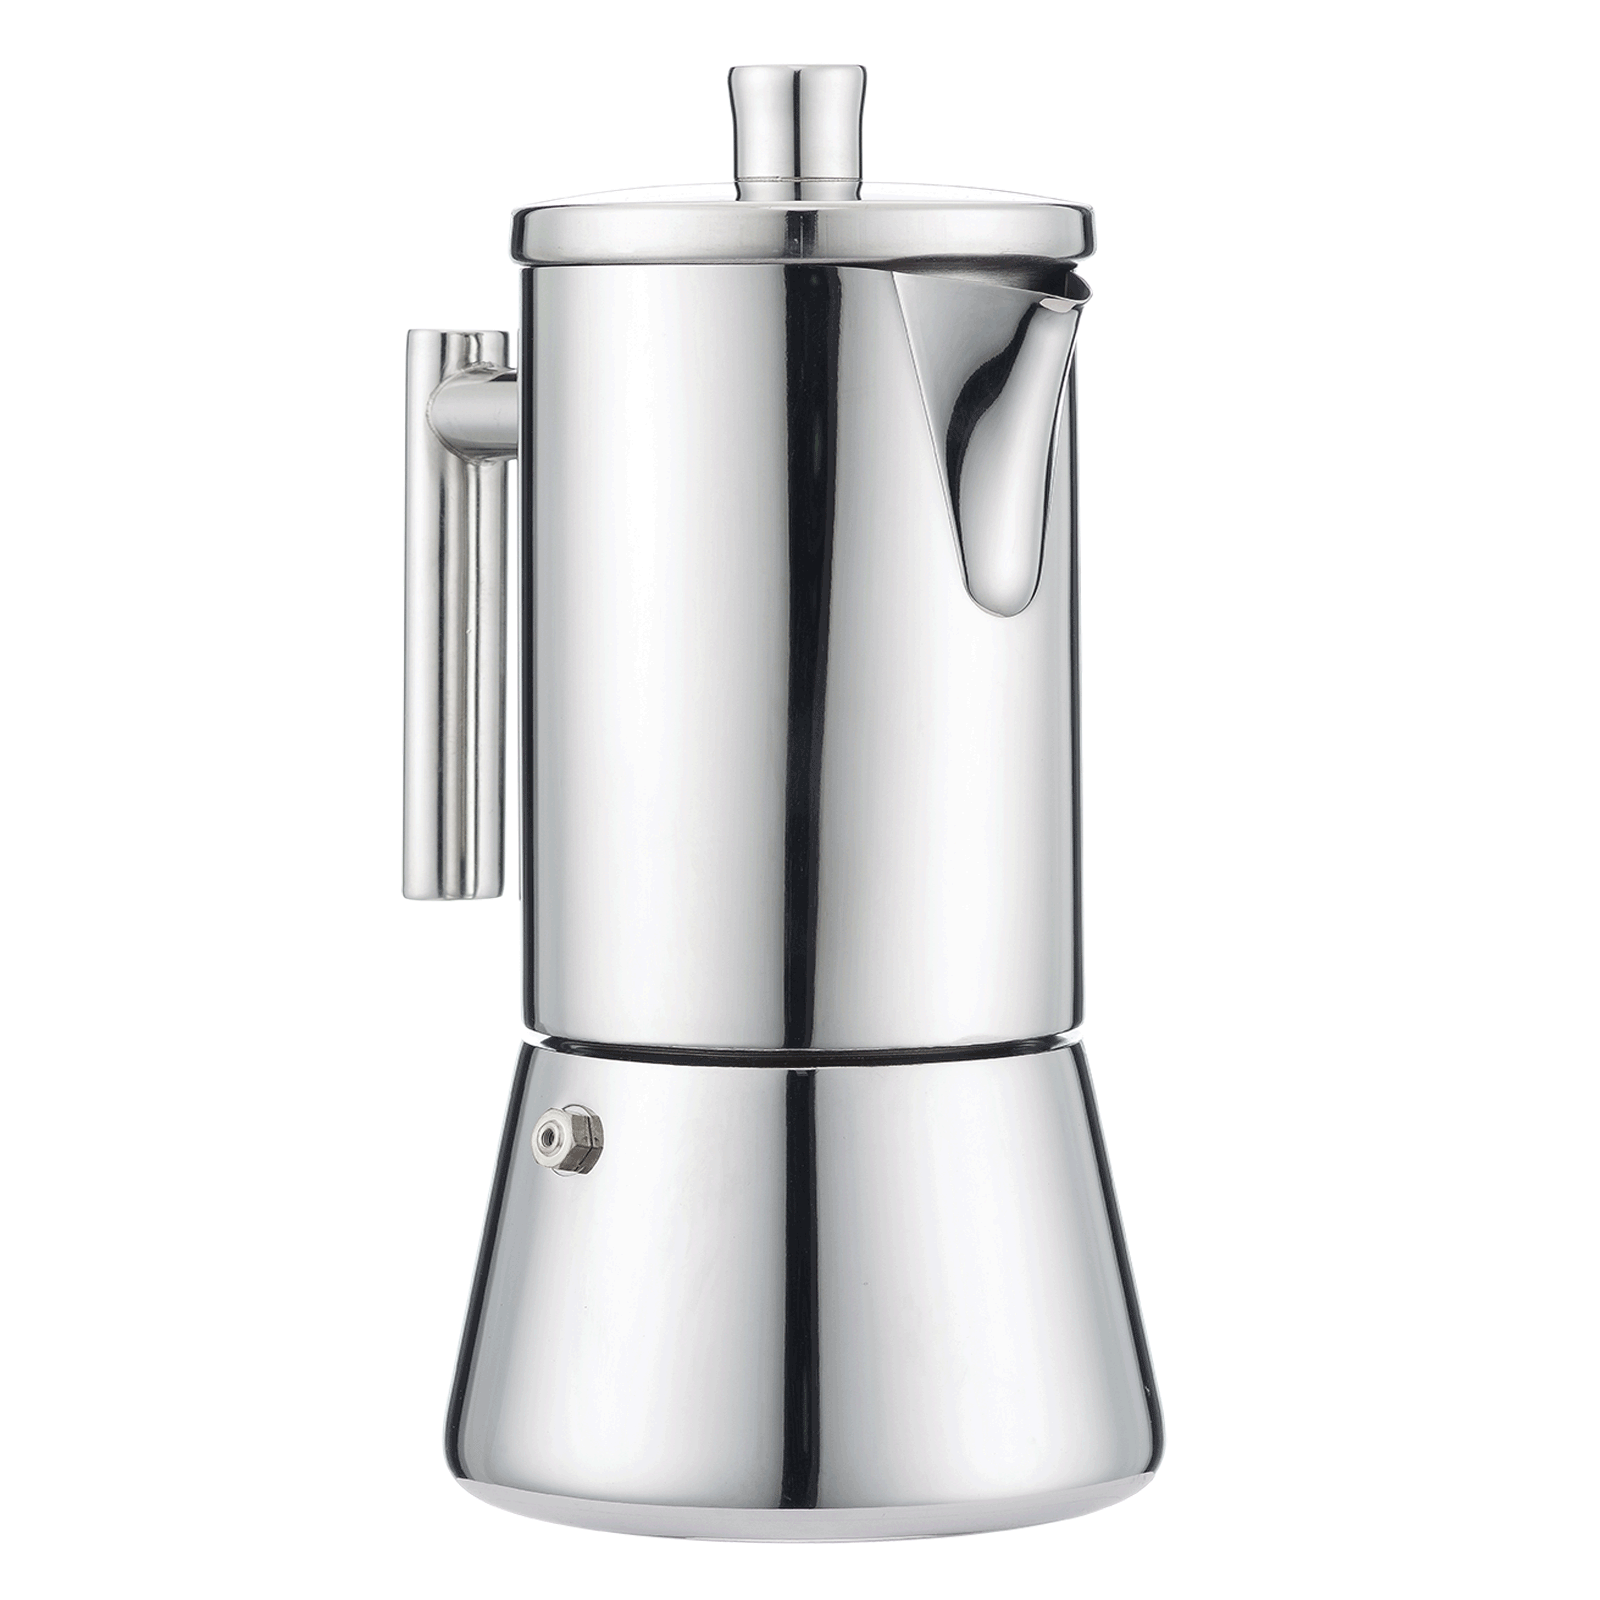  Easyworkz Diego Stovetop Espresso Maker Stainless Steel Italian  Coffee Machine Maker 12Cup 17.5 oz Induction Moka Pot: Home & Kitchen